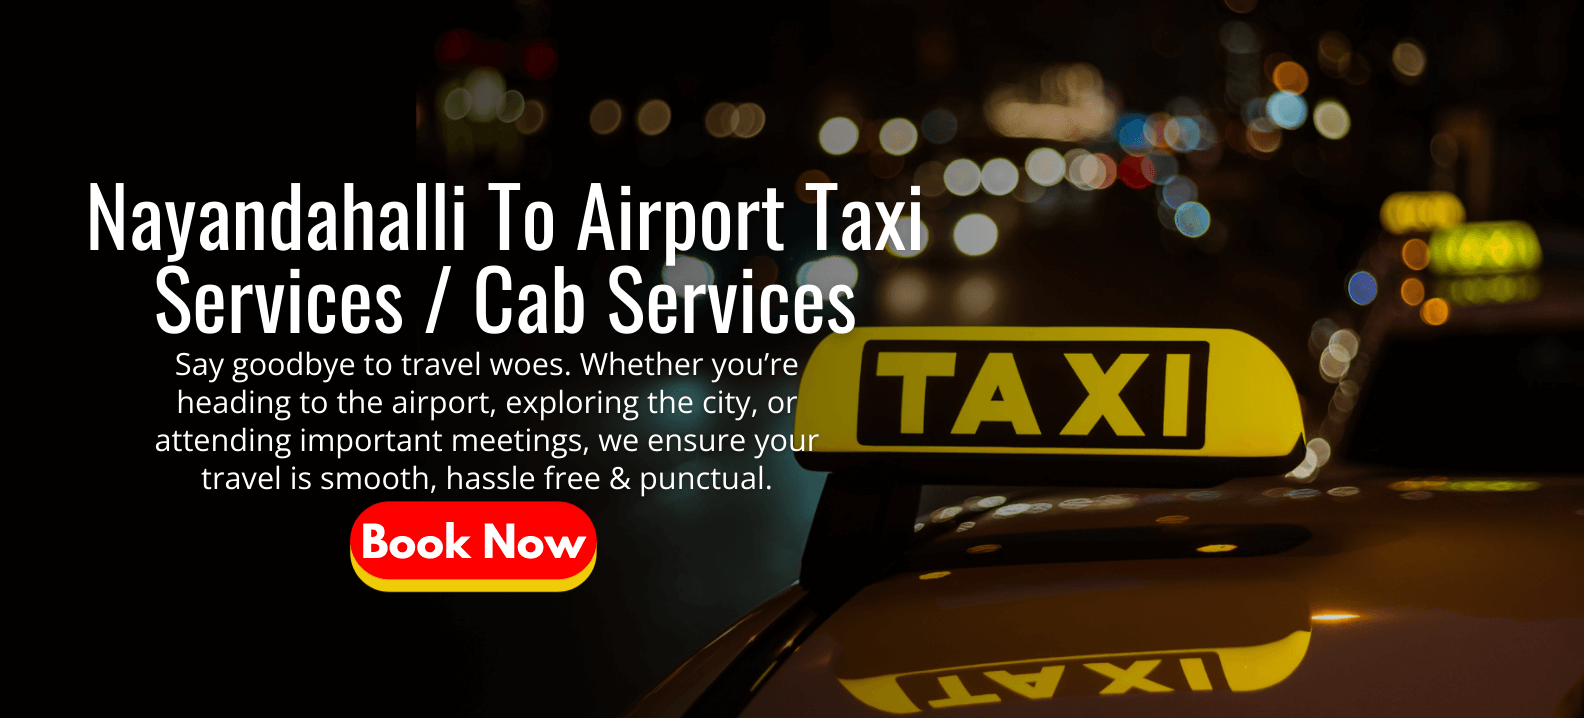 Nayanda Halli to Airport Taxi Services | Cab Services